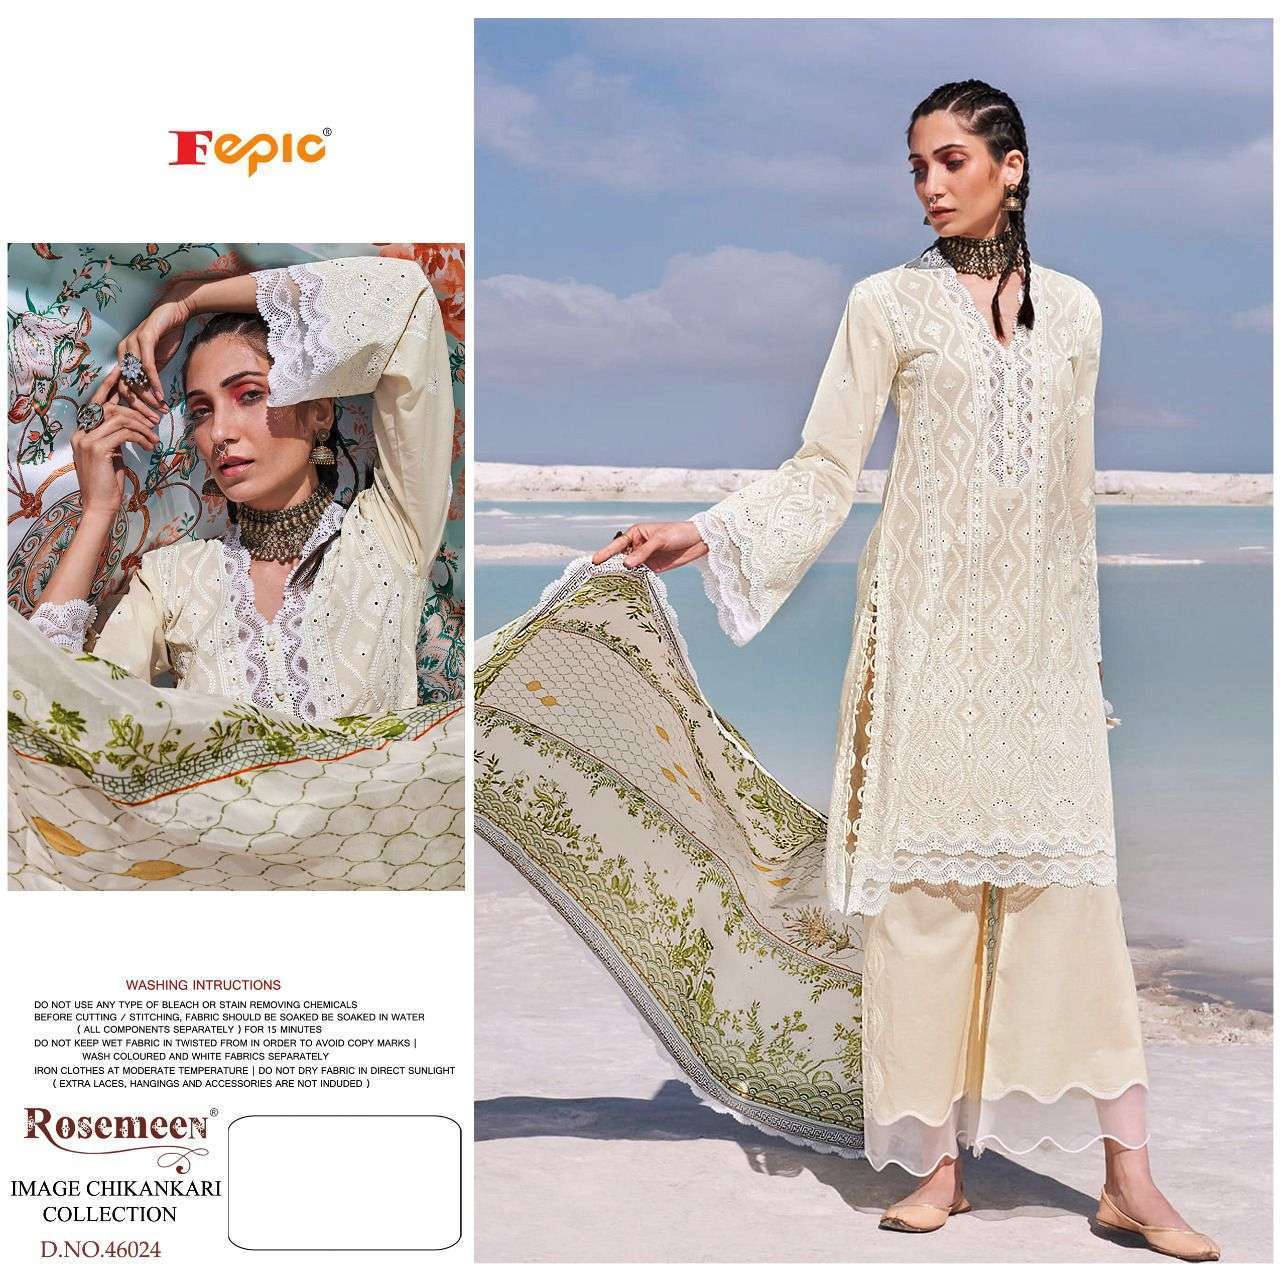 FEPIC PRESENTS CHIKANKARI GEORGETTE WITH EMBROIDERY WHOLESALE PAKISTANI SUIT